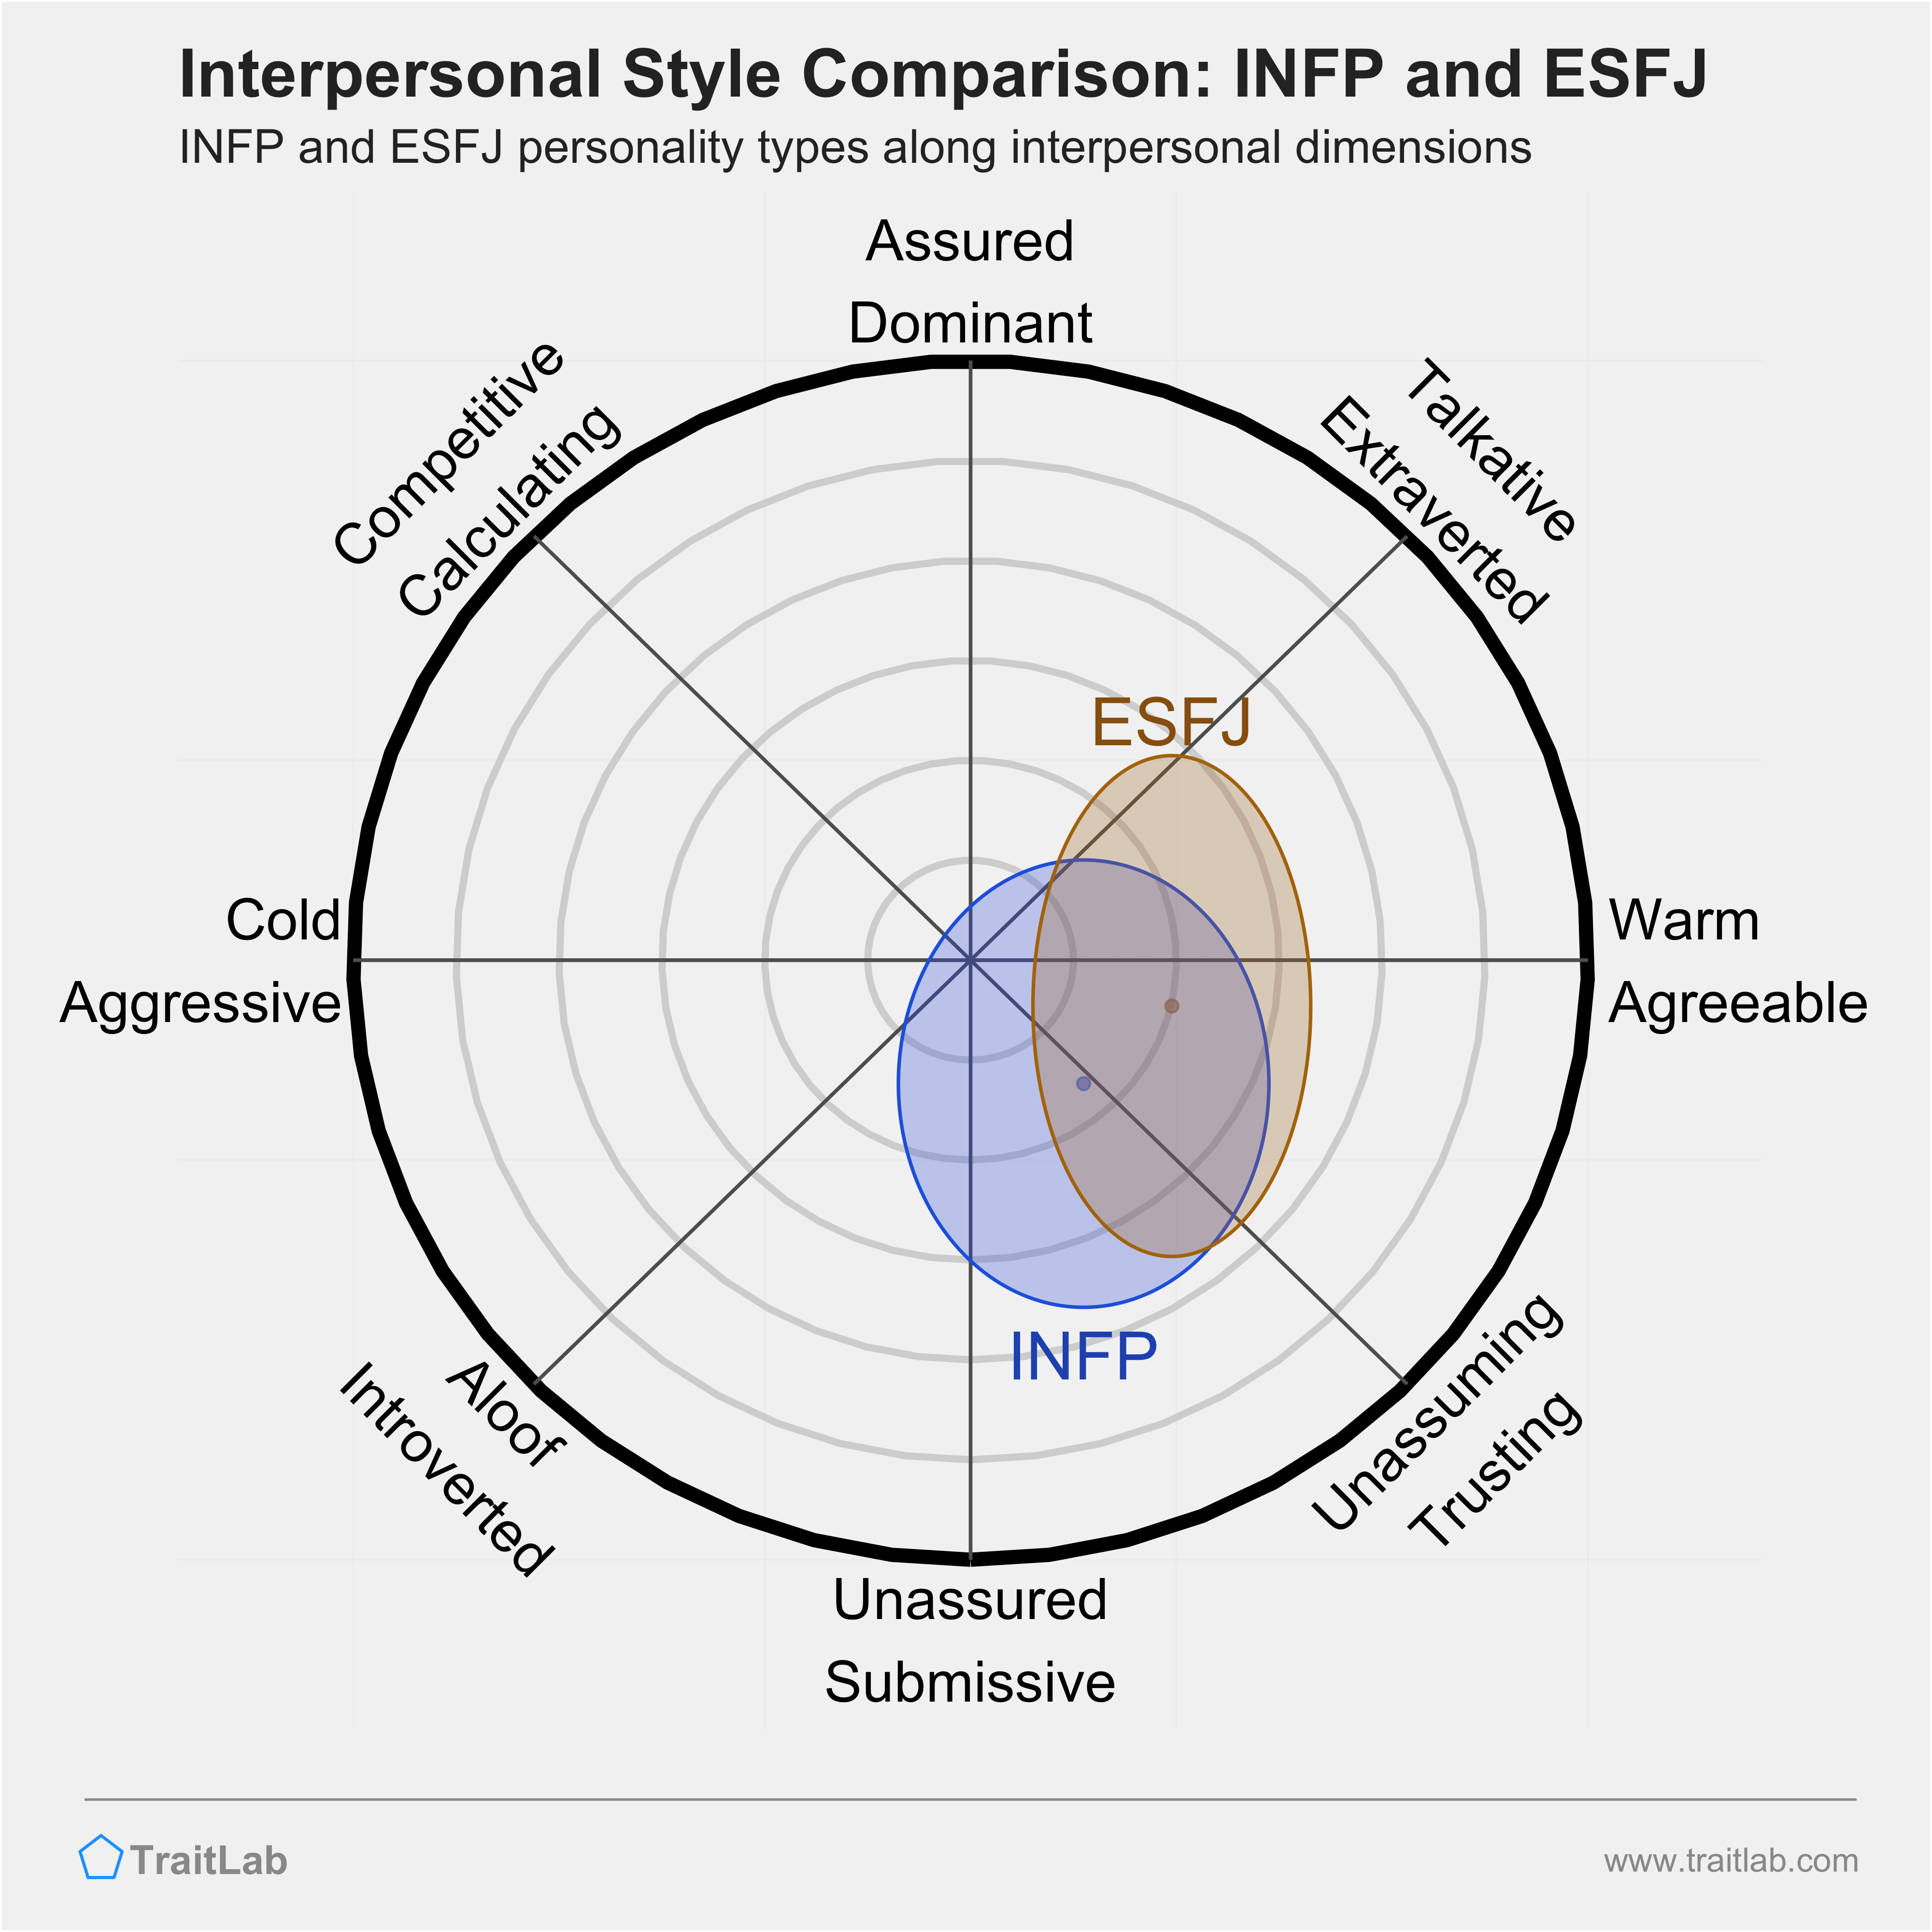 INFP and ESFJ comparison across interpersonal dimensions